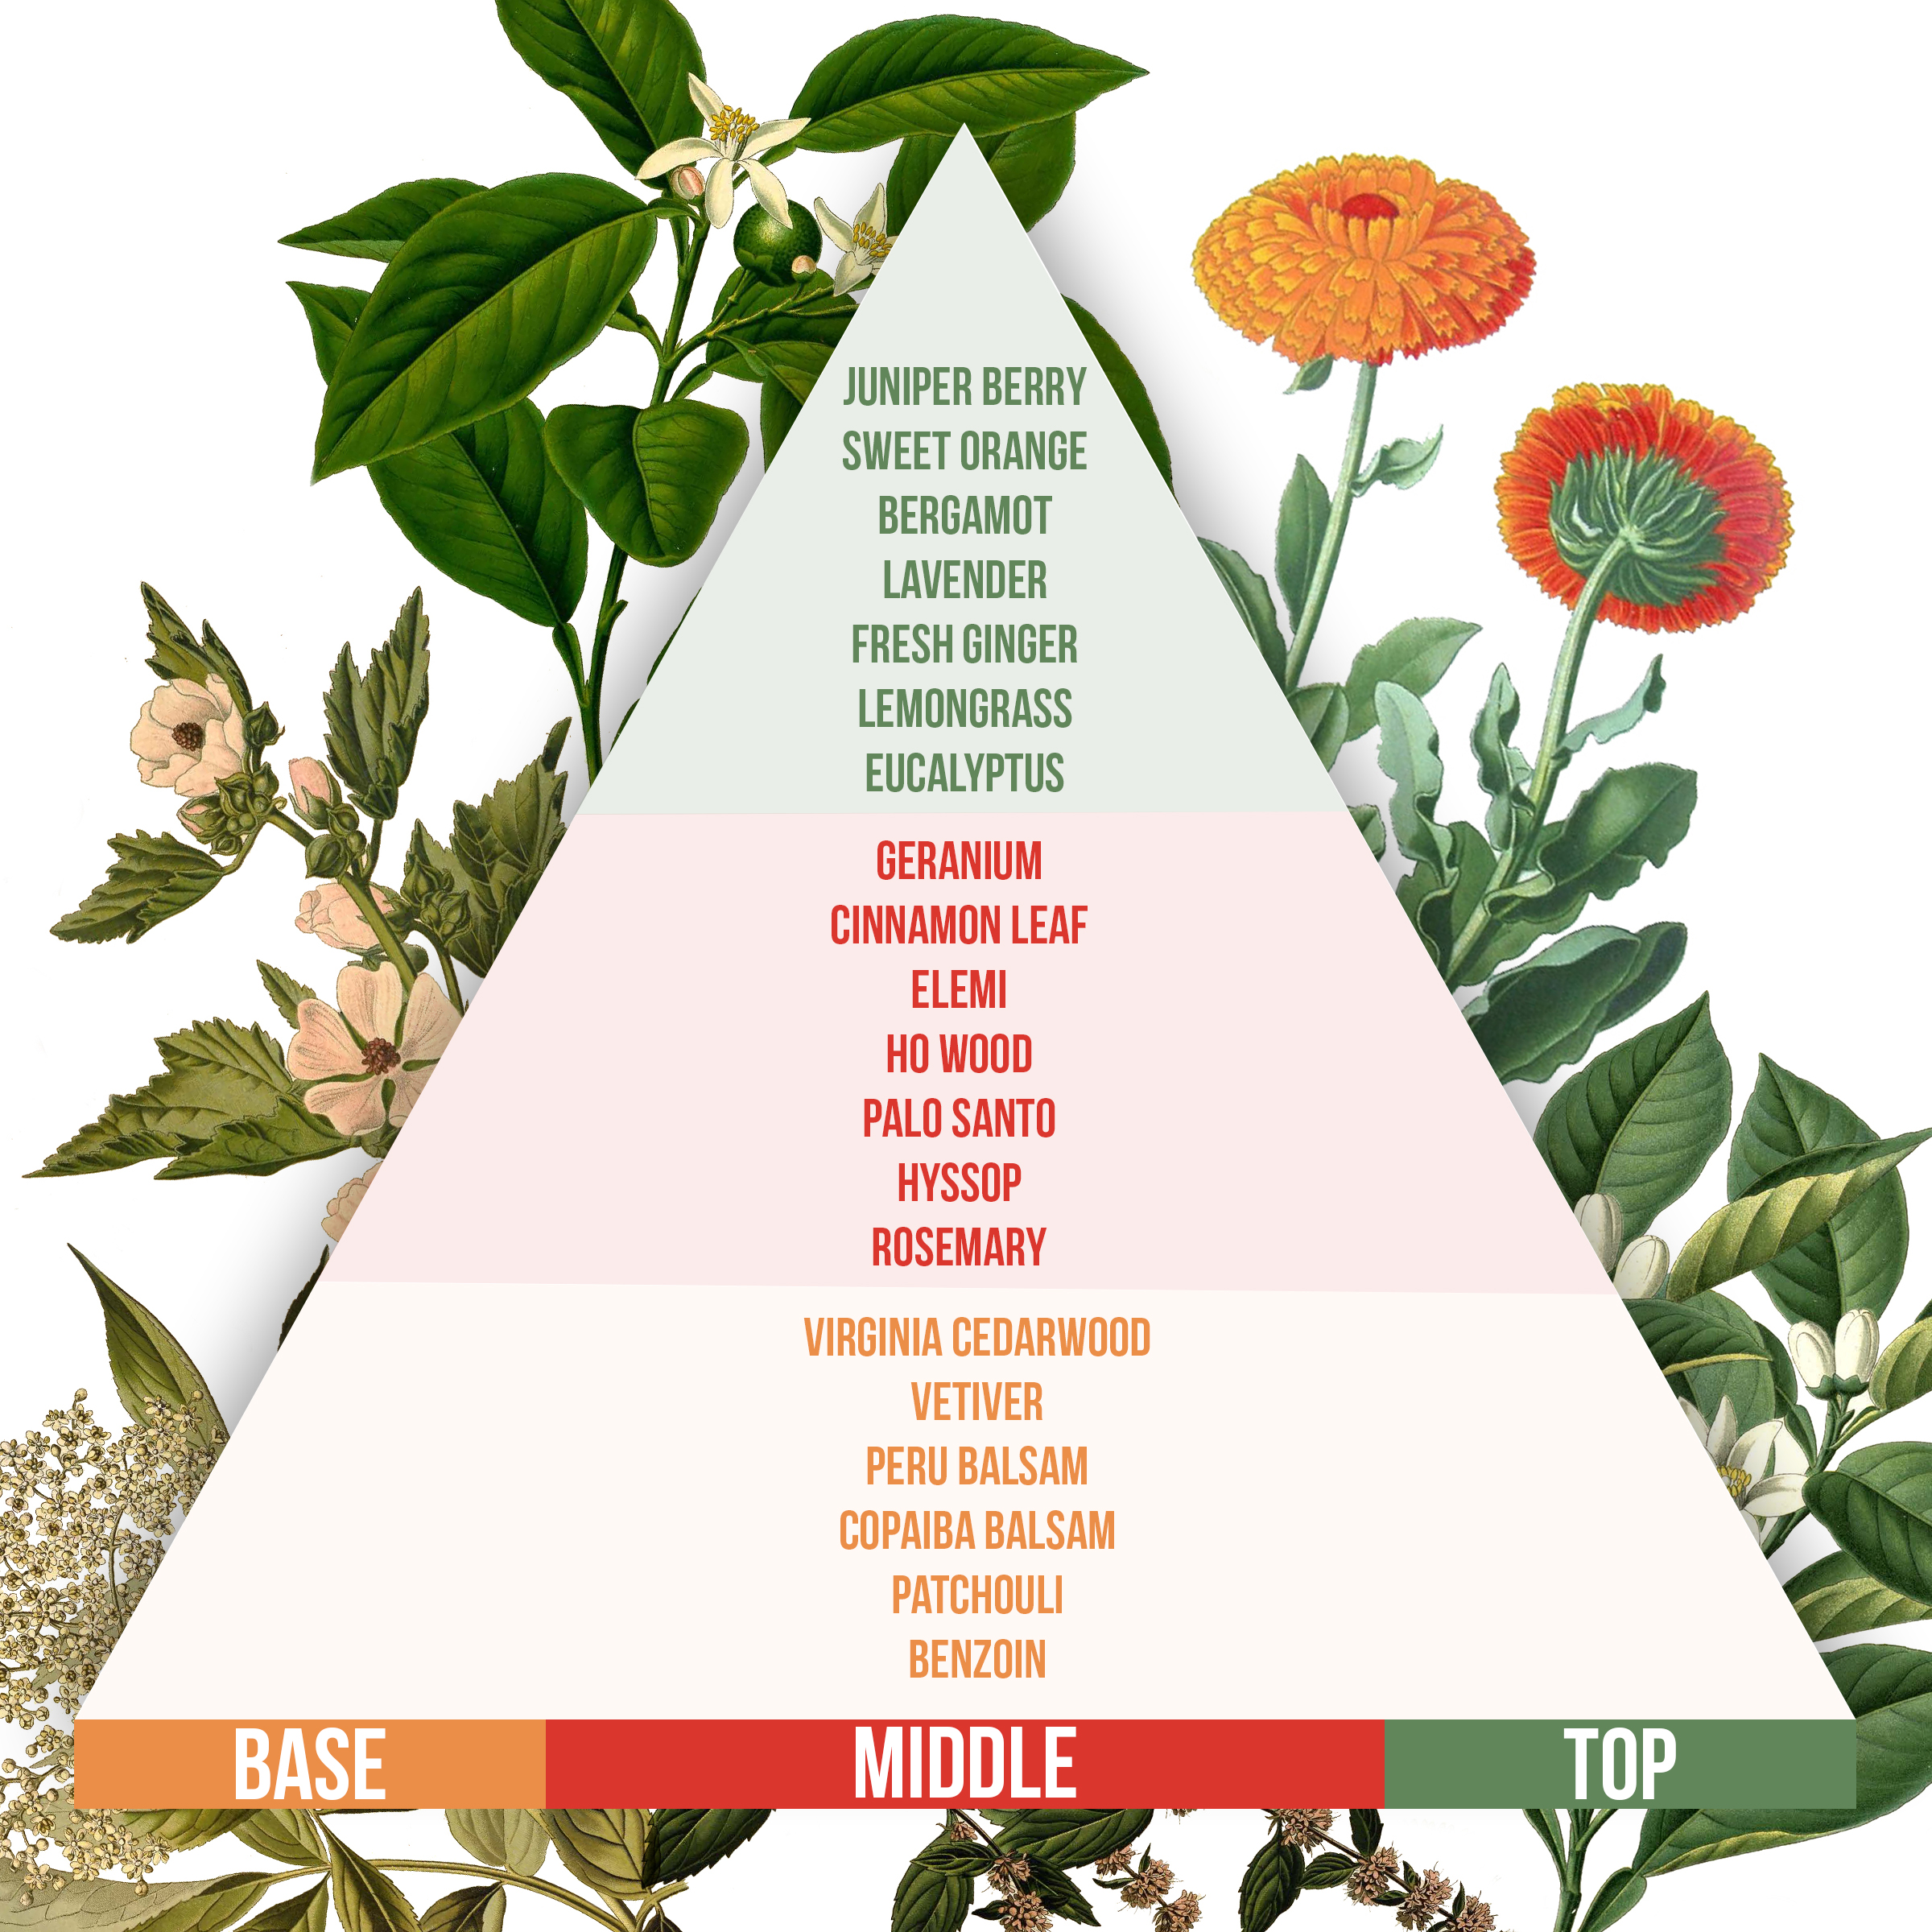 Essential Oil Notes Chart